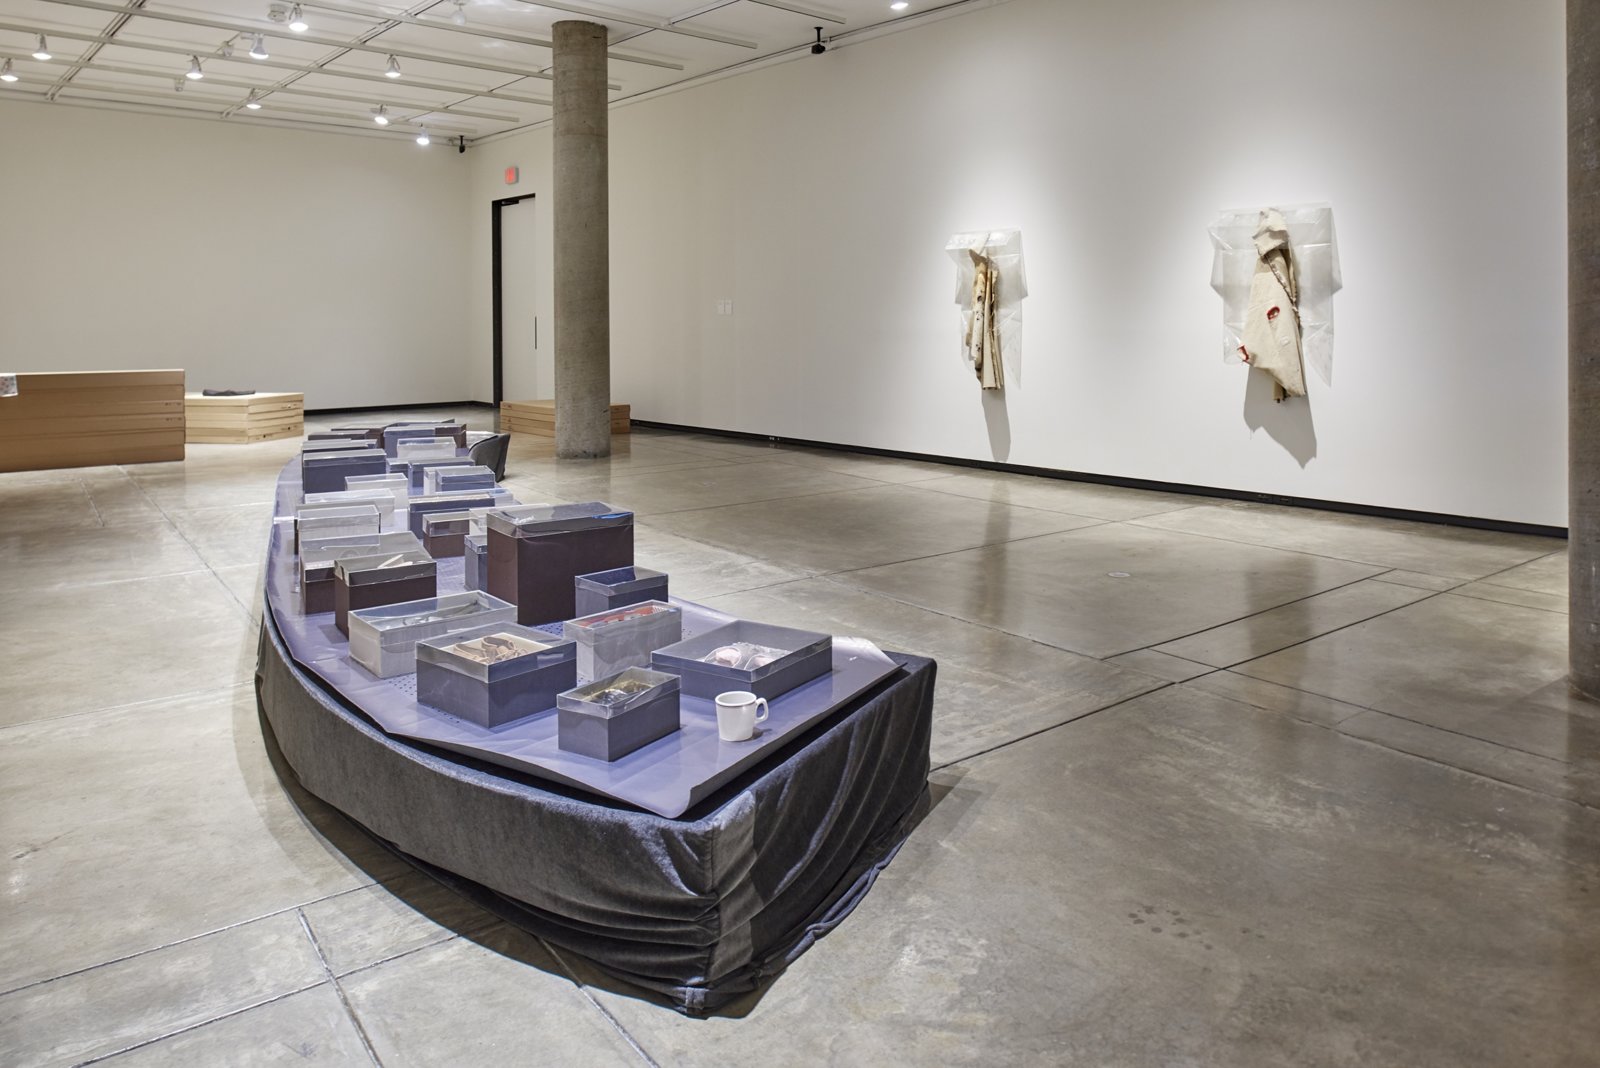 Liz Magor, Shoe World, 2018, 33 pairs of secondhand shoes, mat-board shoeboxes of variable dimensions with polyester film lids, porcelain mug, coffee, and plywood platform with fabric cover, 12 x 288 x 40 in. (31 x 732 x 102 cm). Installation view, BLOWOUT, Carpenter Center for Visual Arts, Cambridge, USA